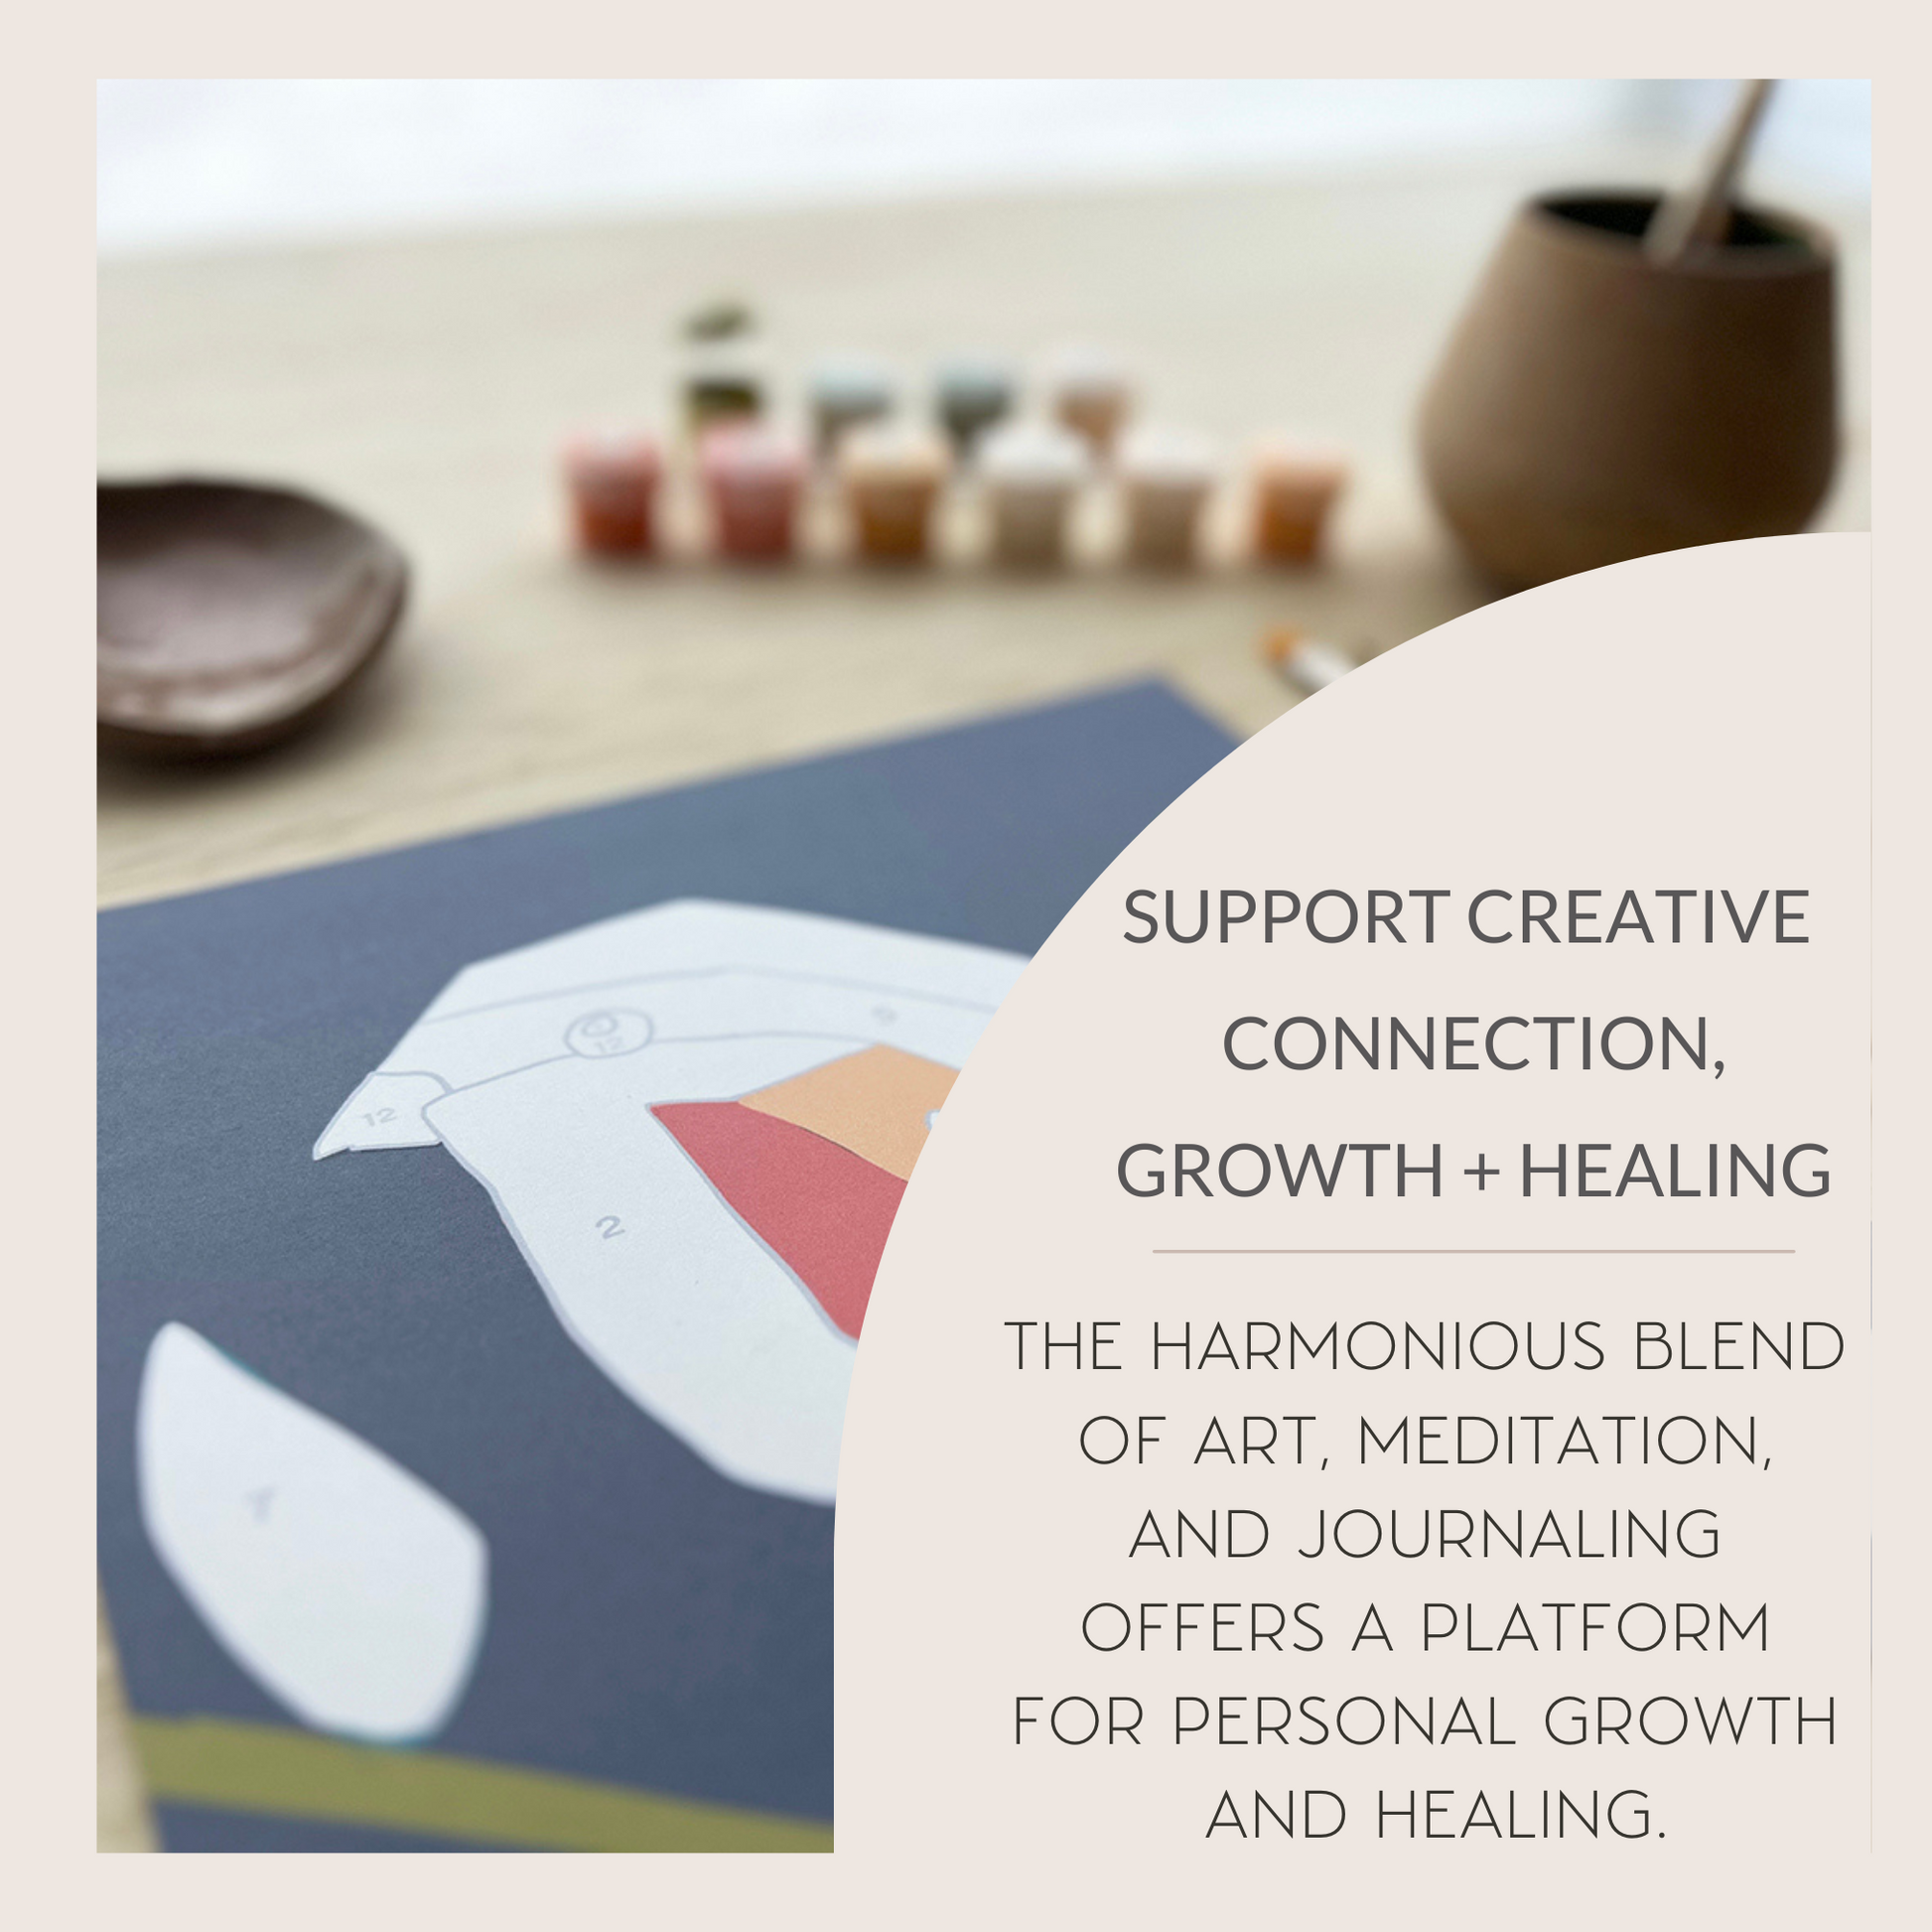 Support creative connection, growth and healing. 